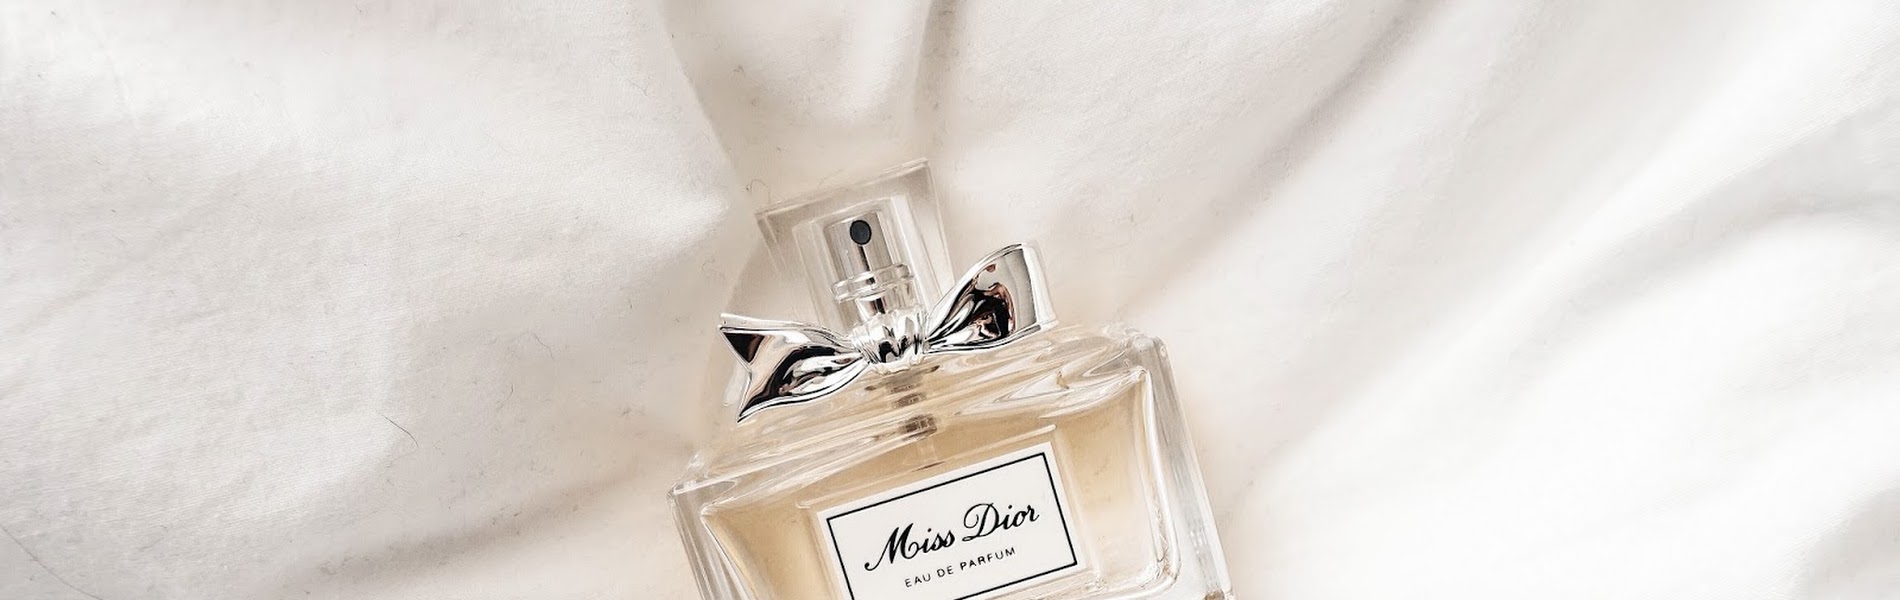 miss dior cherie review